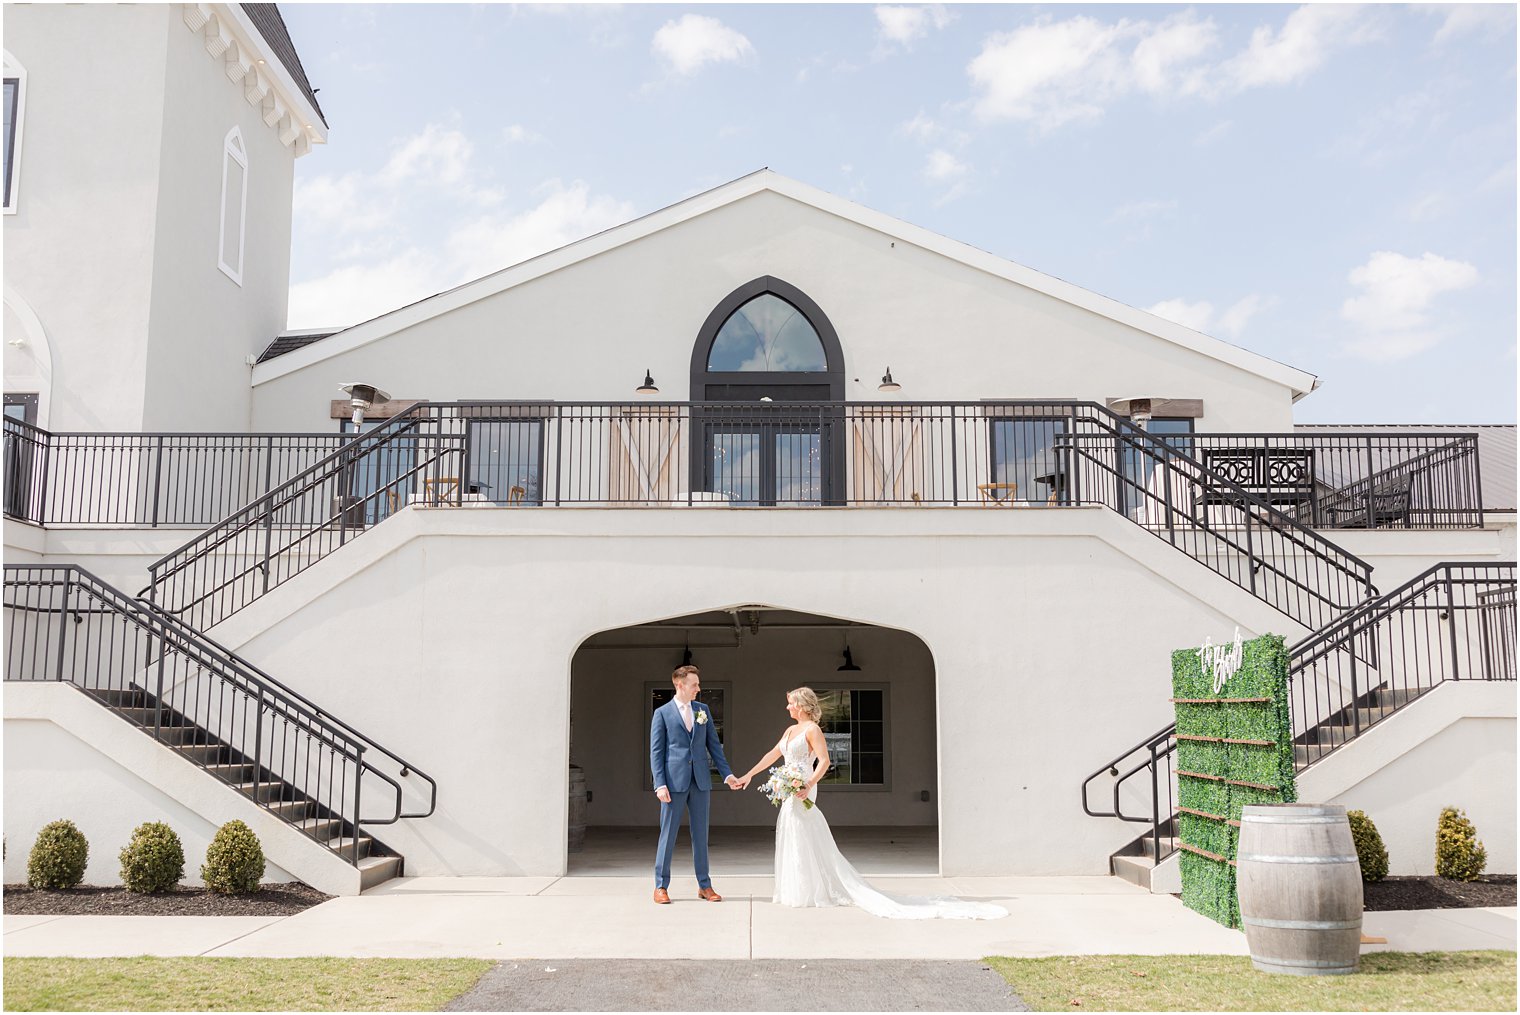 bride and groom photos in front of Vineyard Ballroom at Renault Winery in Egg Harbor Township, NJ